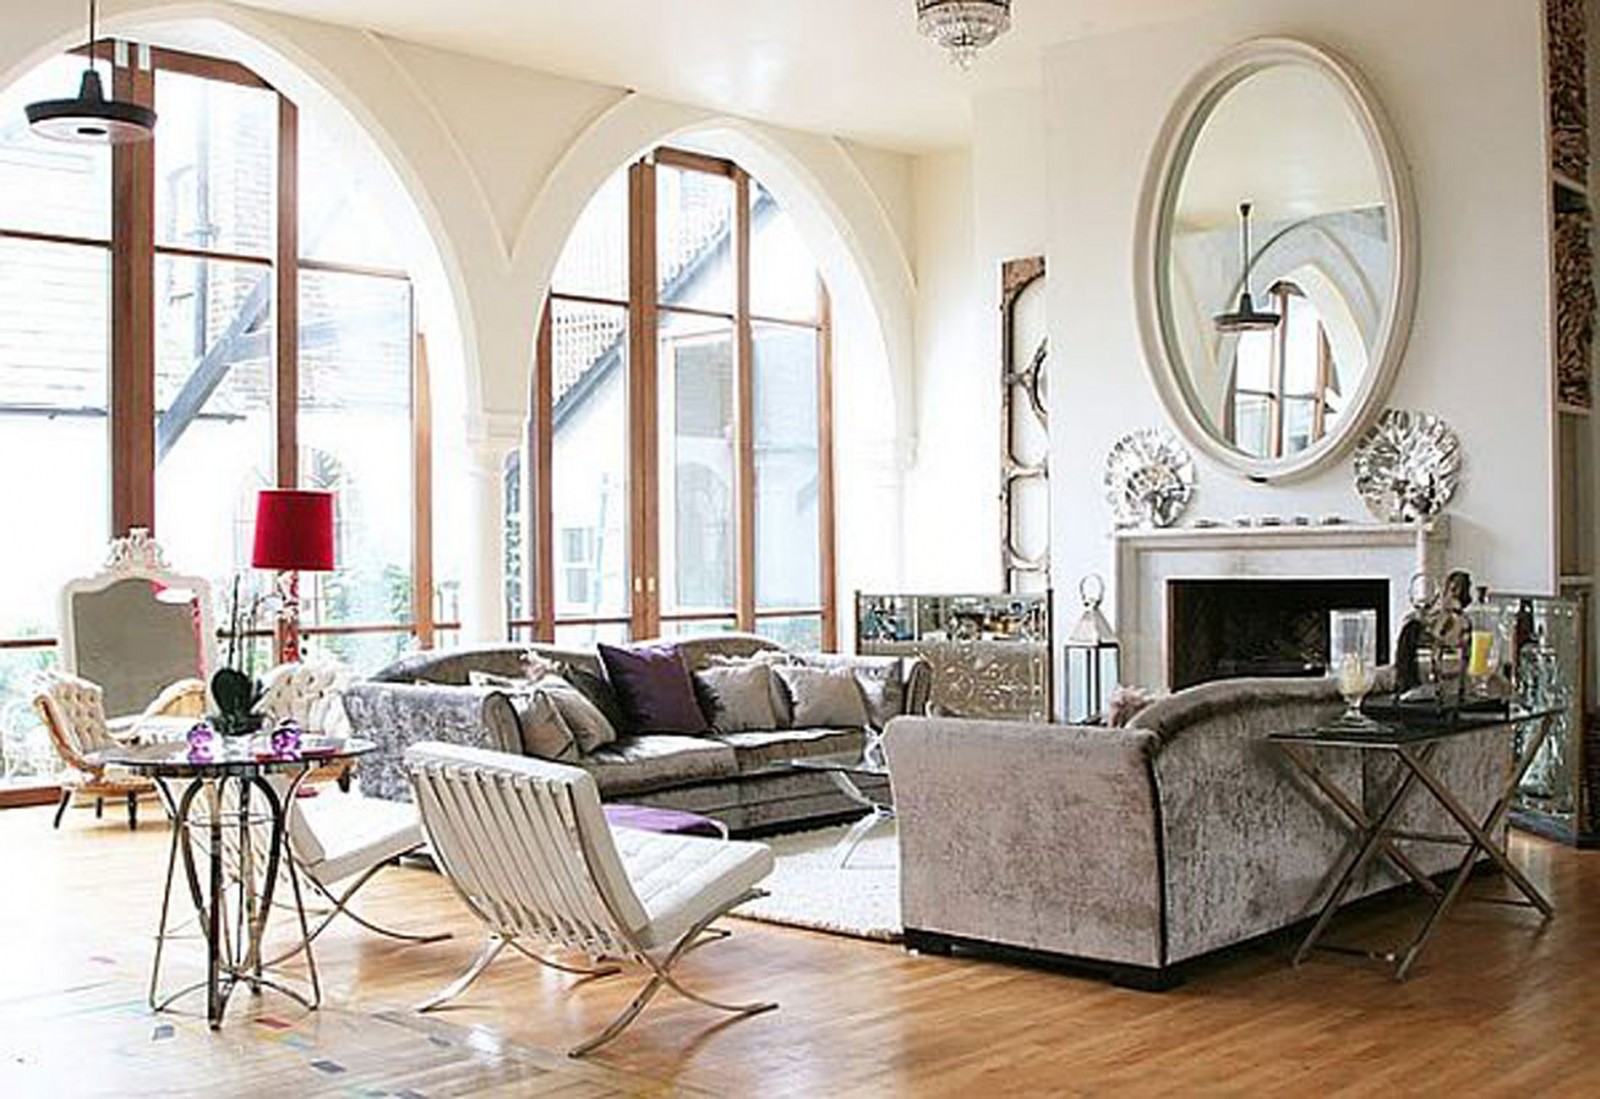  A living room with natural light from the arched windows, a large mirror, and a mix of modern and traditional furniture.